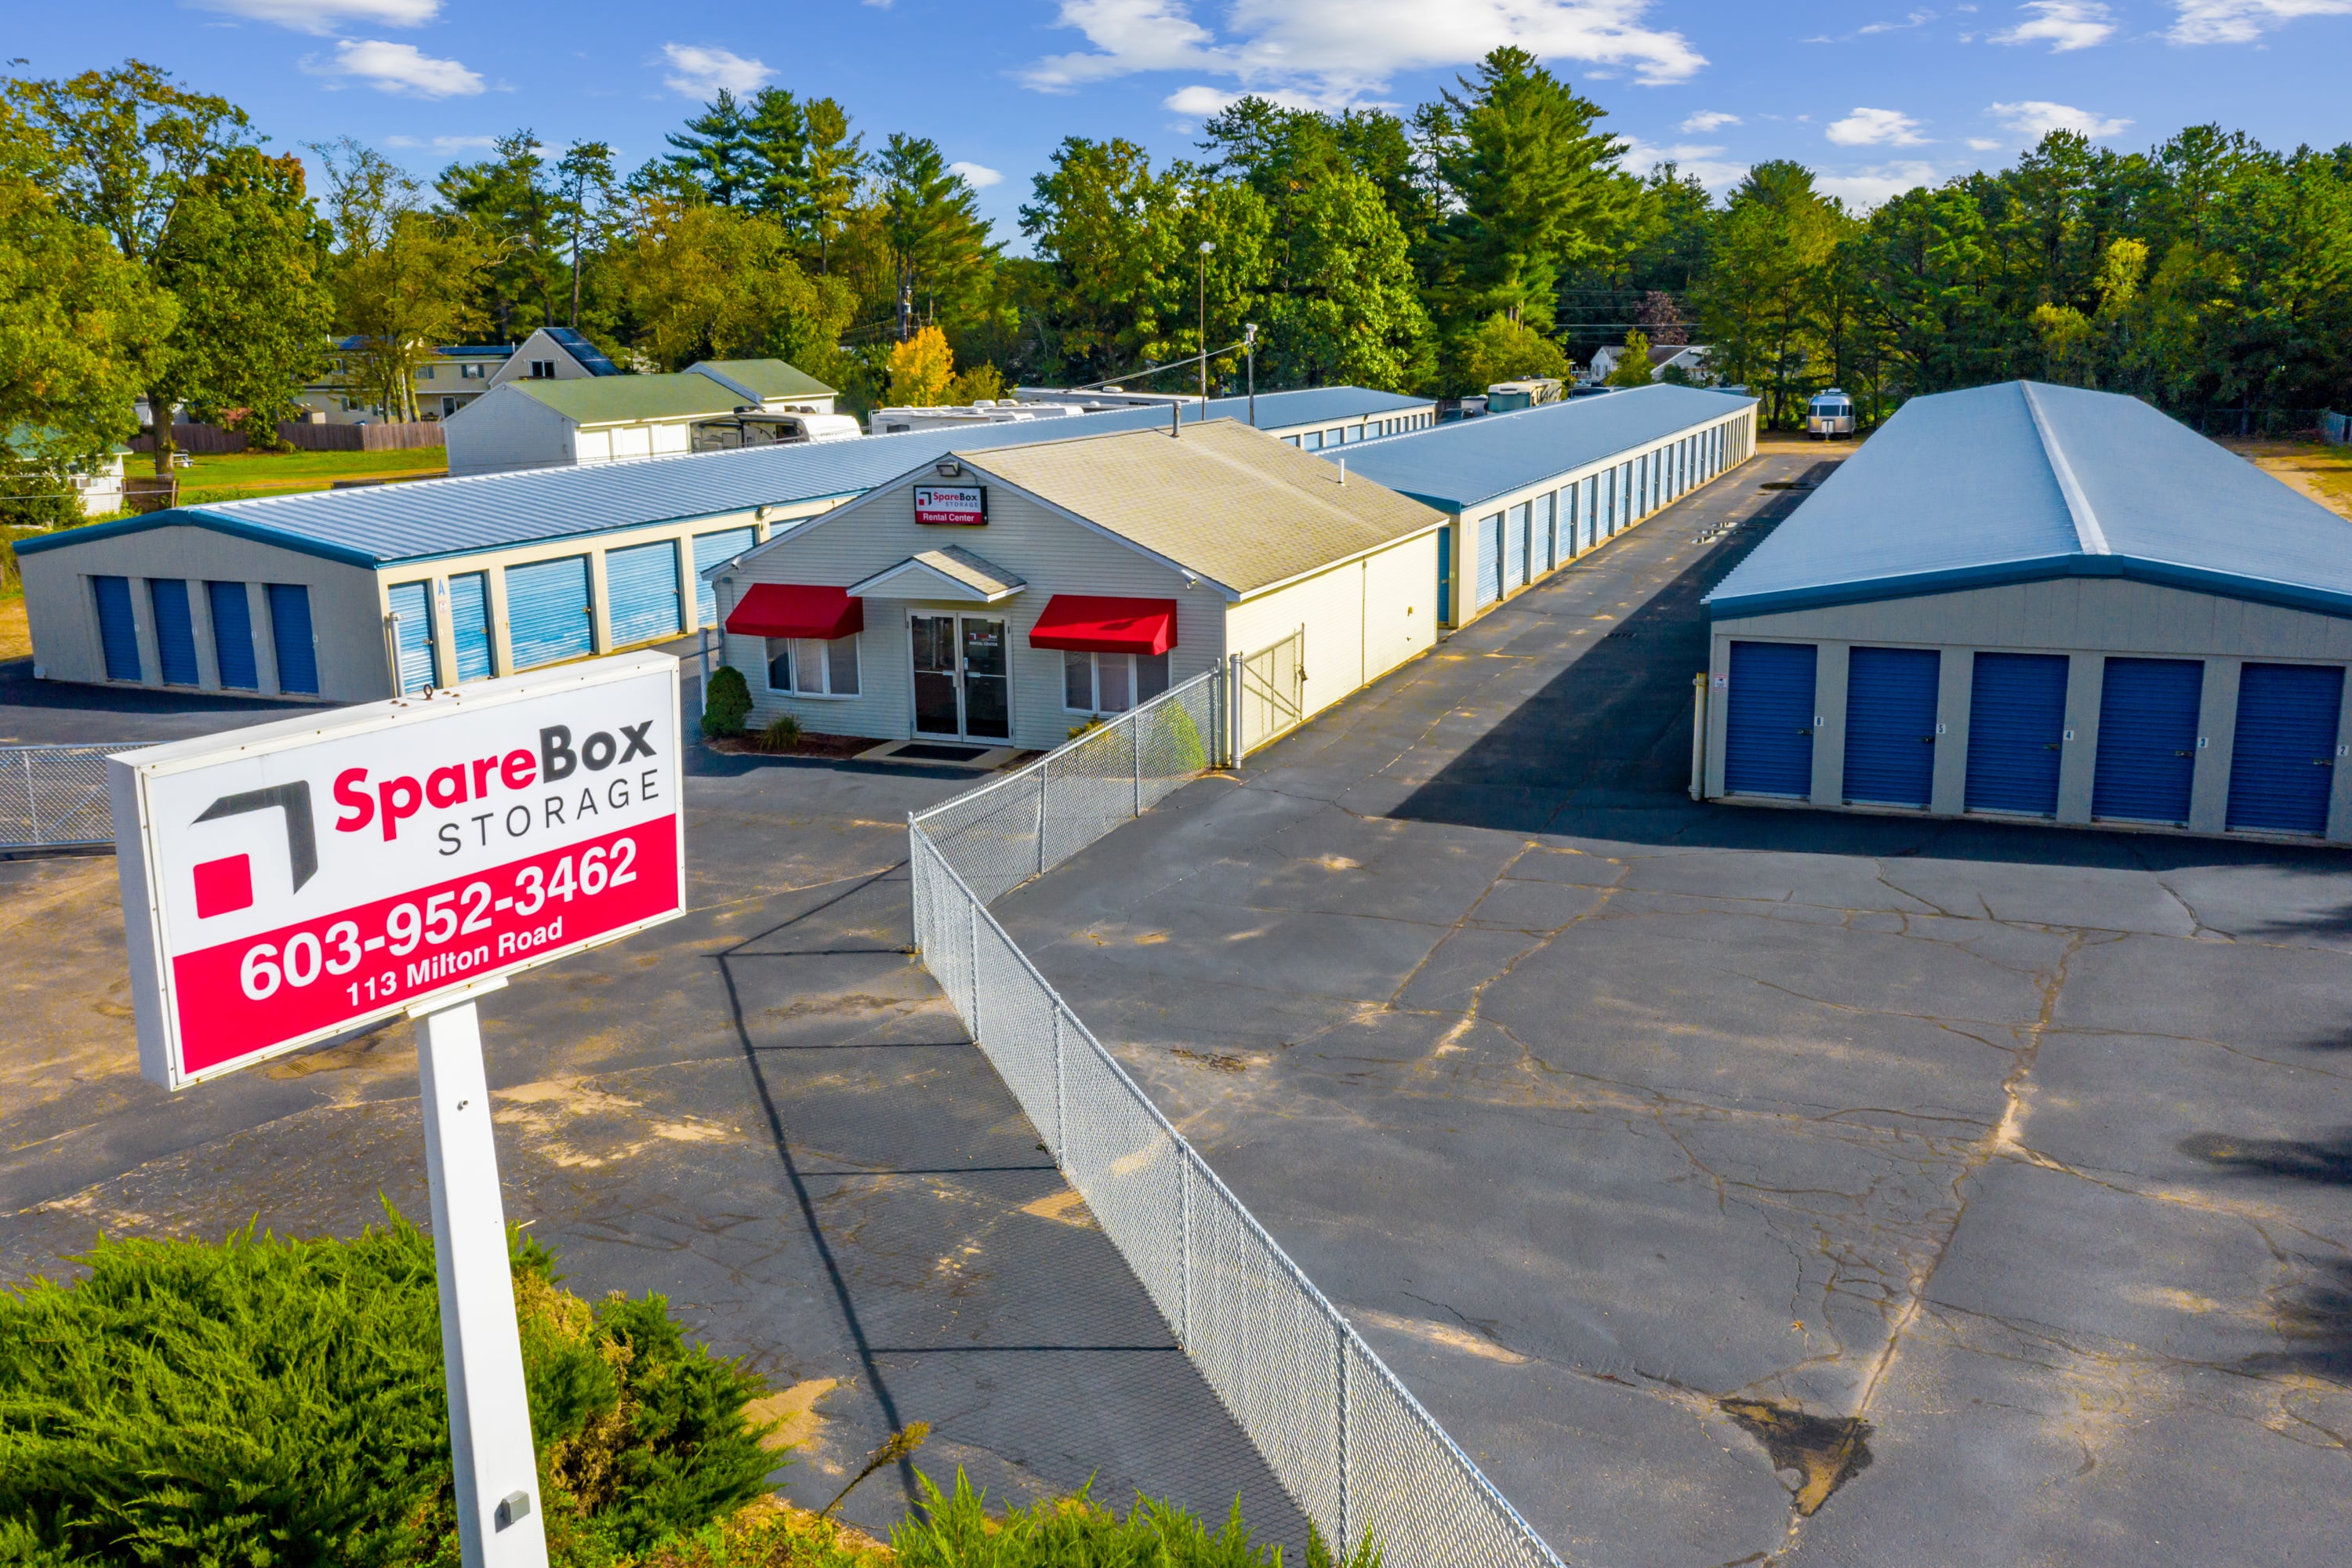 SpareBox Storage has affordable self-storage near Rochester, NH, with many options and amenities | SpareBox Storage